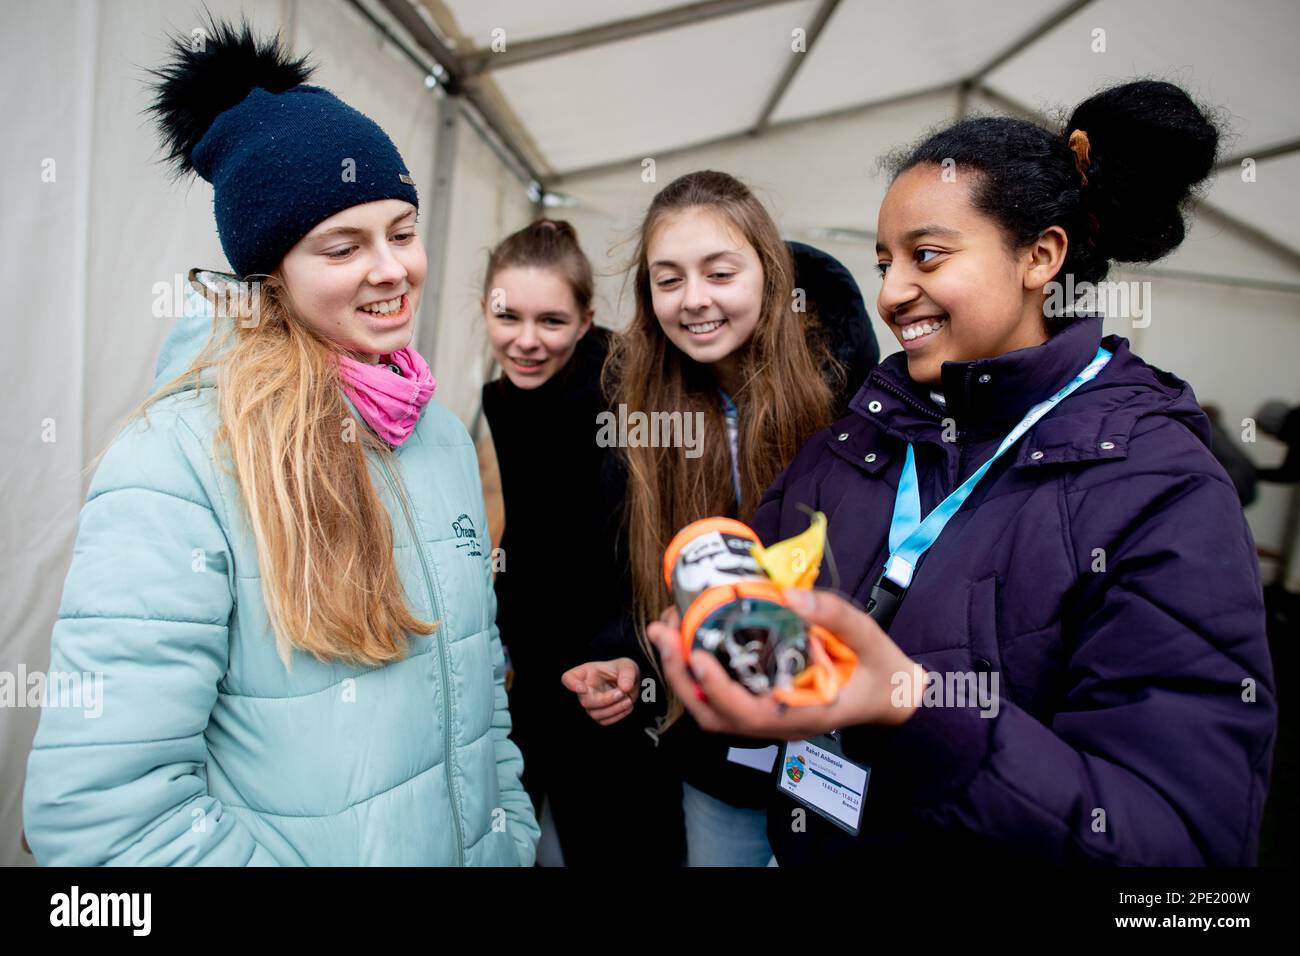 15 March 2023, Lower Saxony, Rotenburg (Wümme): Participants Elisa (l-r), Sophia, Charlotte and Rahel from the 'ClouDDSat' team from Dresden hold a mini-satellite with associated parachute in their hands. Eight German student teams flew self-designed mini satellites from the Rotenburg (Wümme) airfield in the CanSat competition organized by the German Aerospace Center (DLR). The so-called CanSats ('can satellites') were launched one kilometer into the air with rockets, then floated back to earth on parachutes. Photo: Hauke-Christian Dittrich/dpa Stock Photo